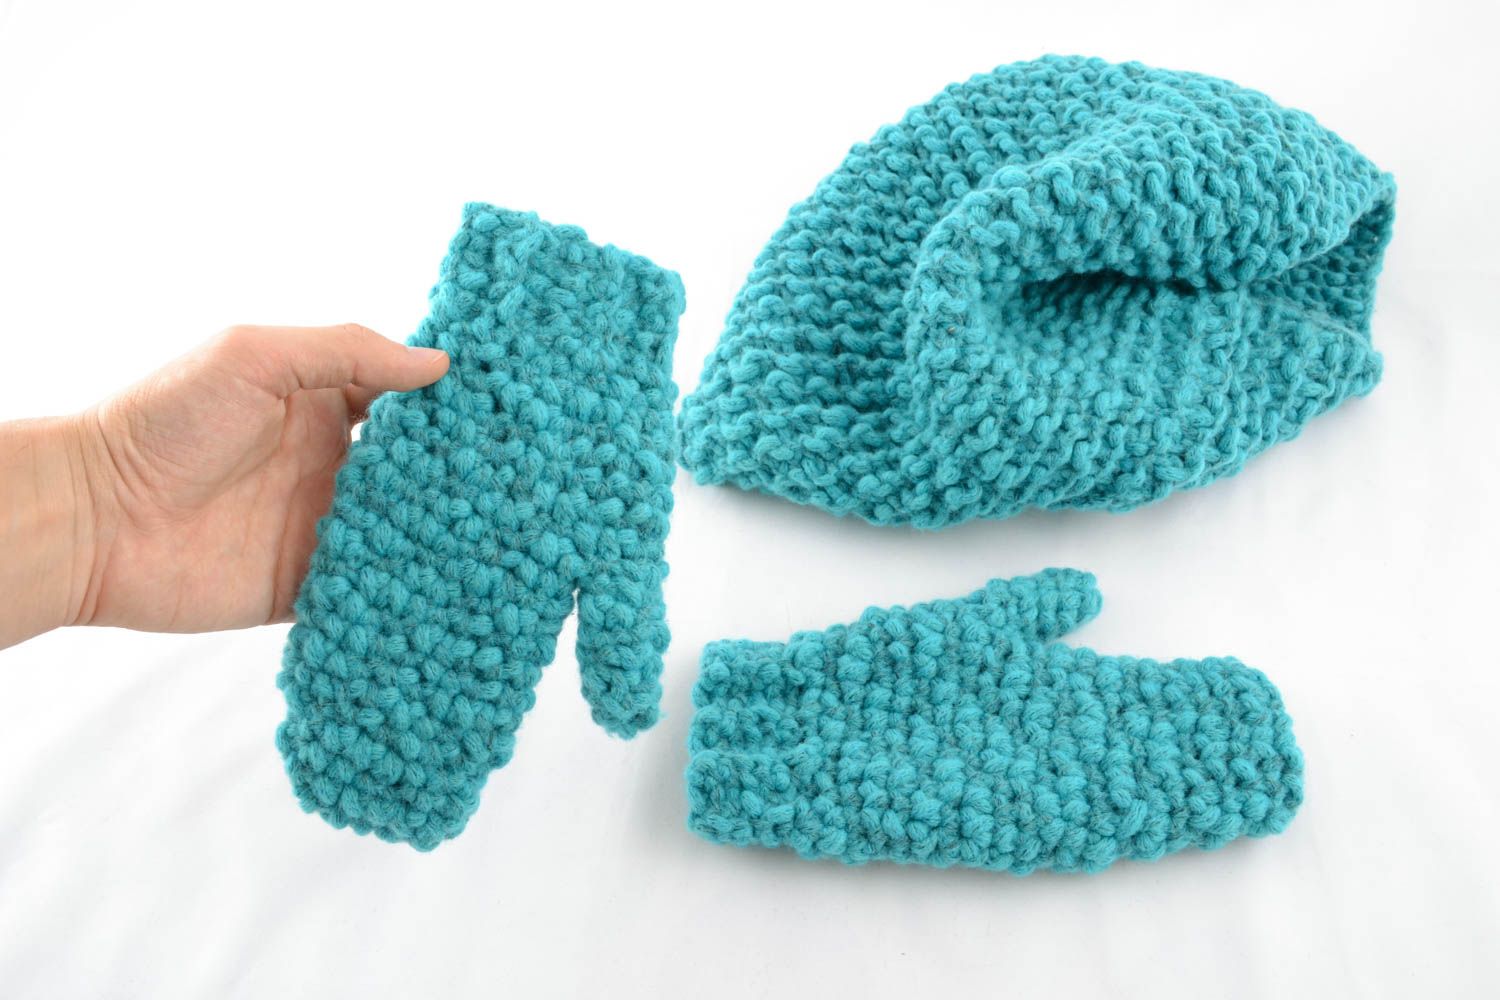 Crochet scarf and mittens photo 5